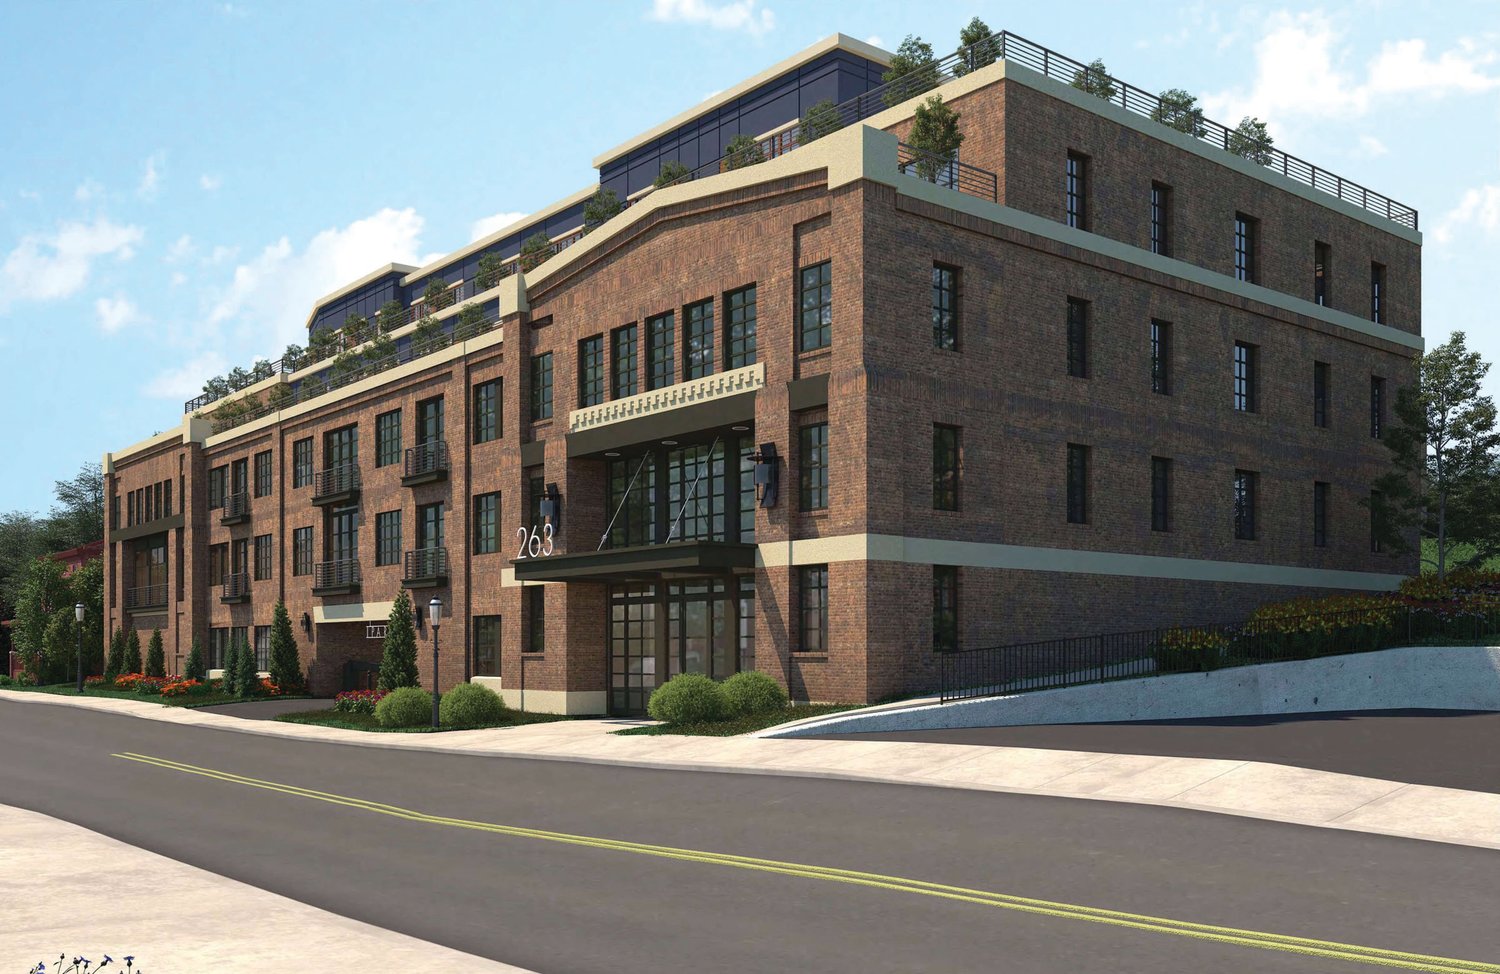 The Martin at Doylestown, at 263 N. Main St., is expected to be completed next year.